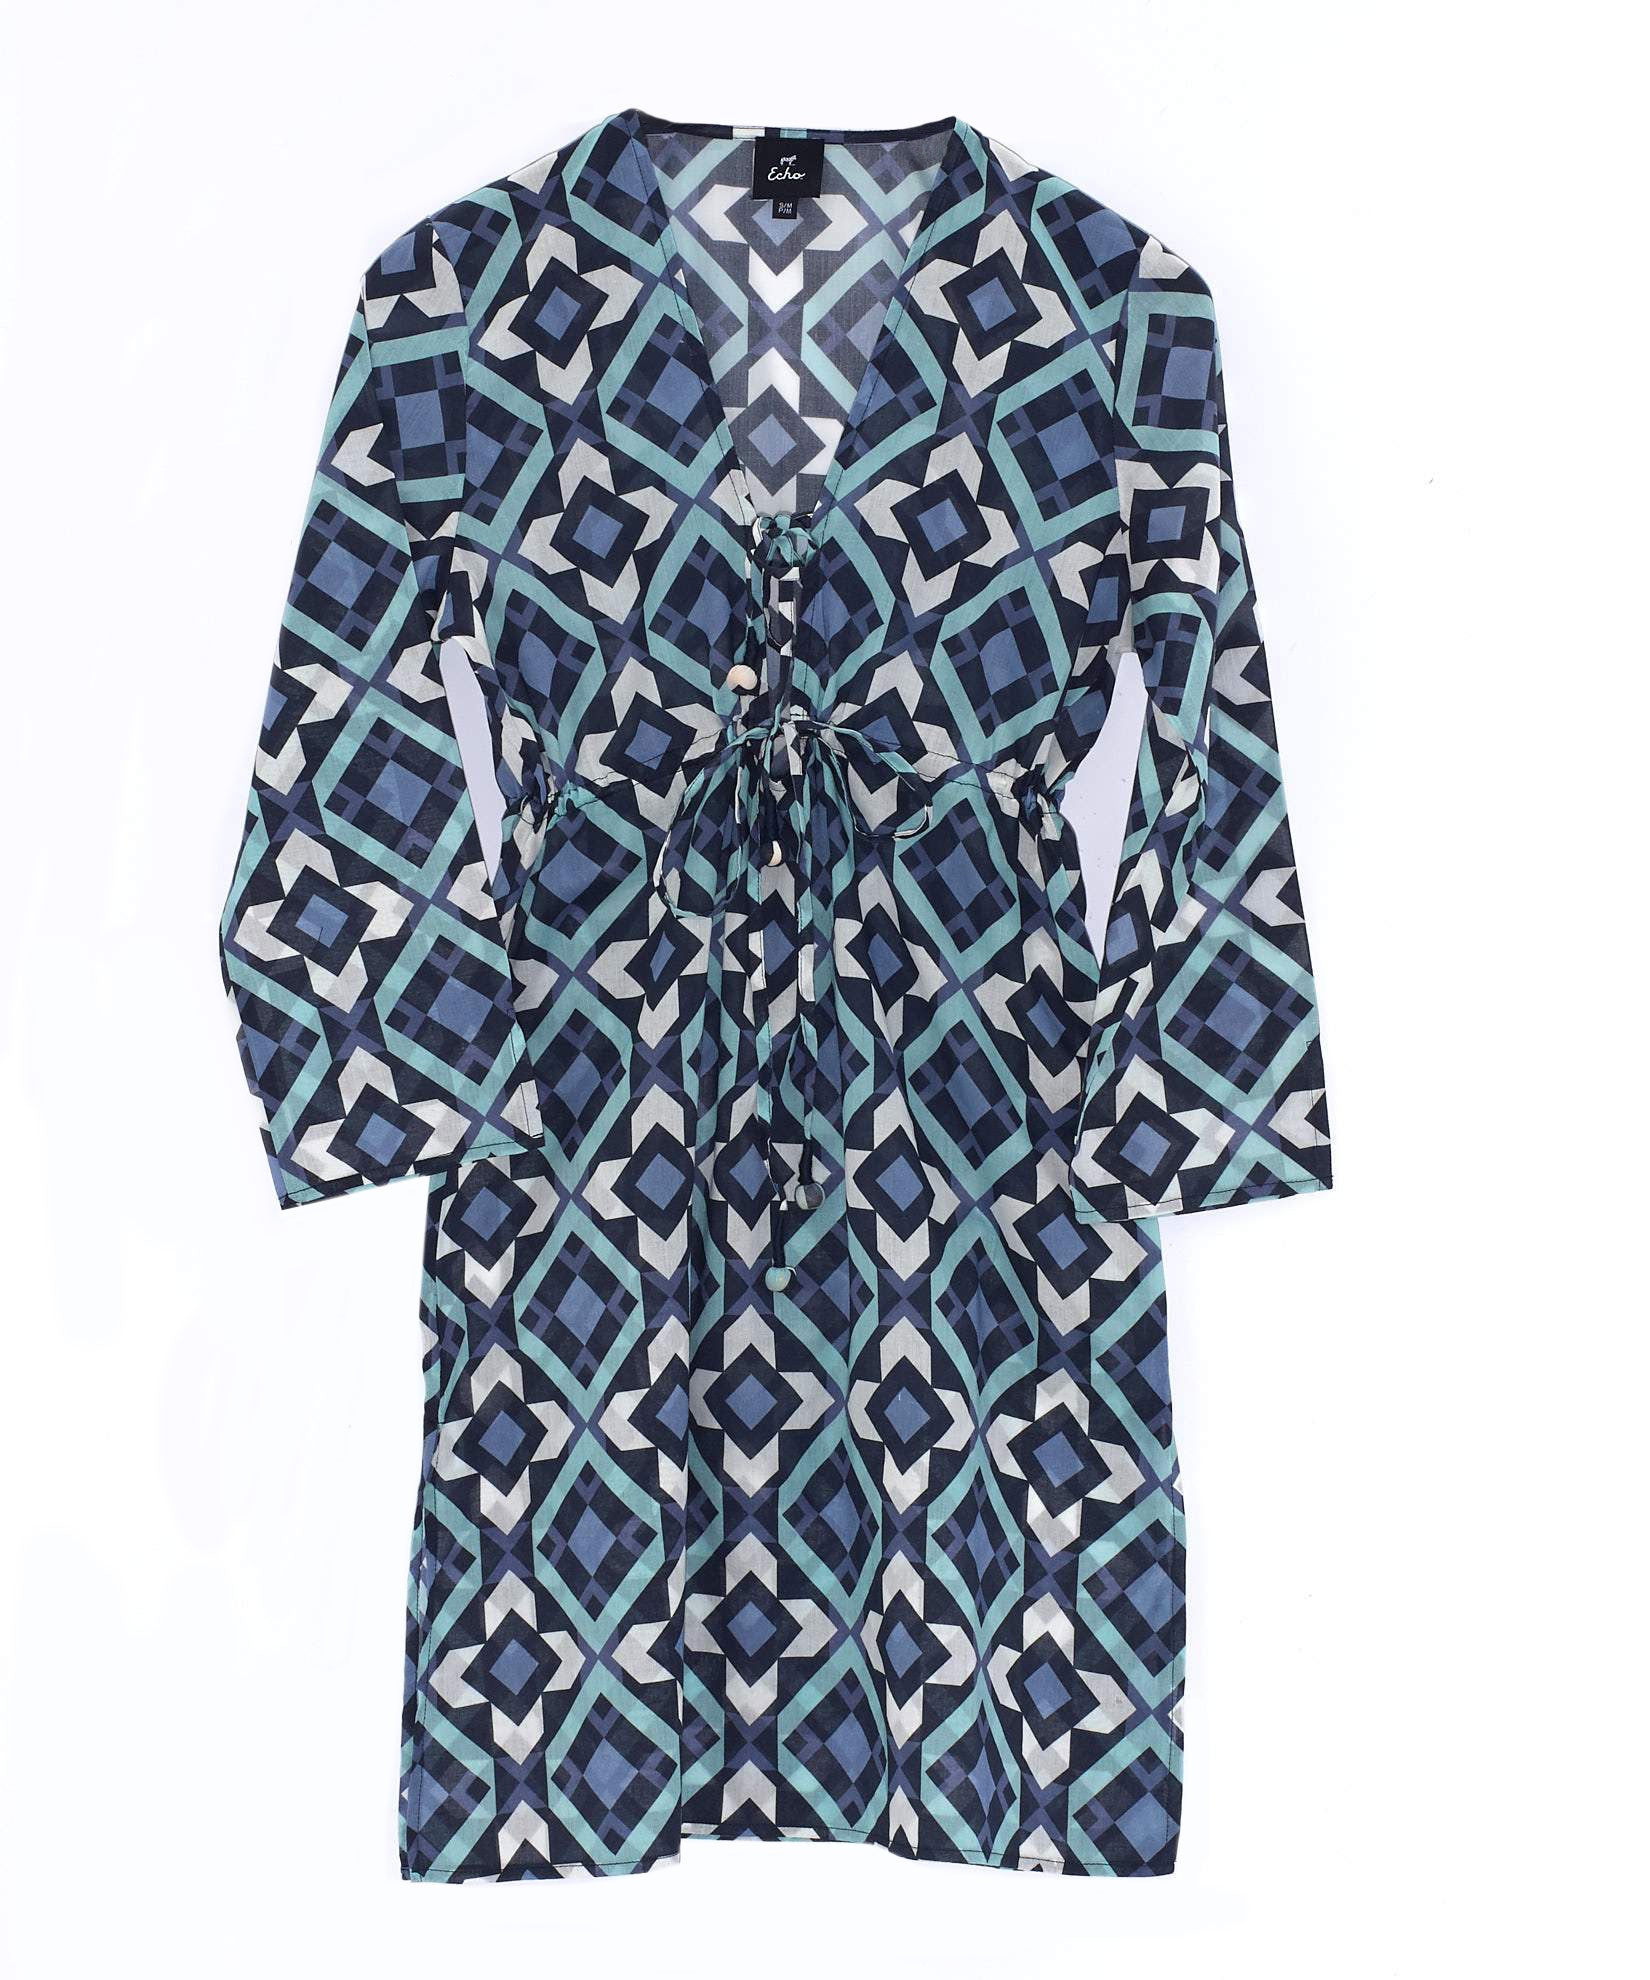 Geo Poolside Tunic Dress in color Navy